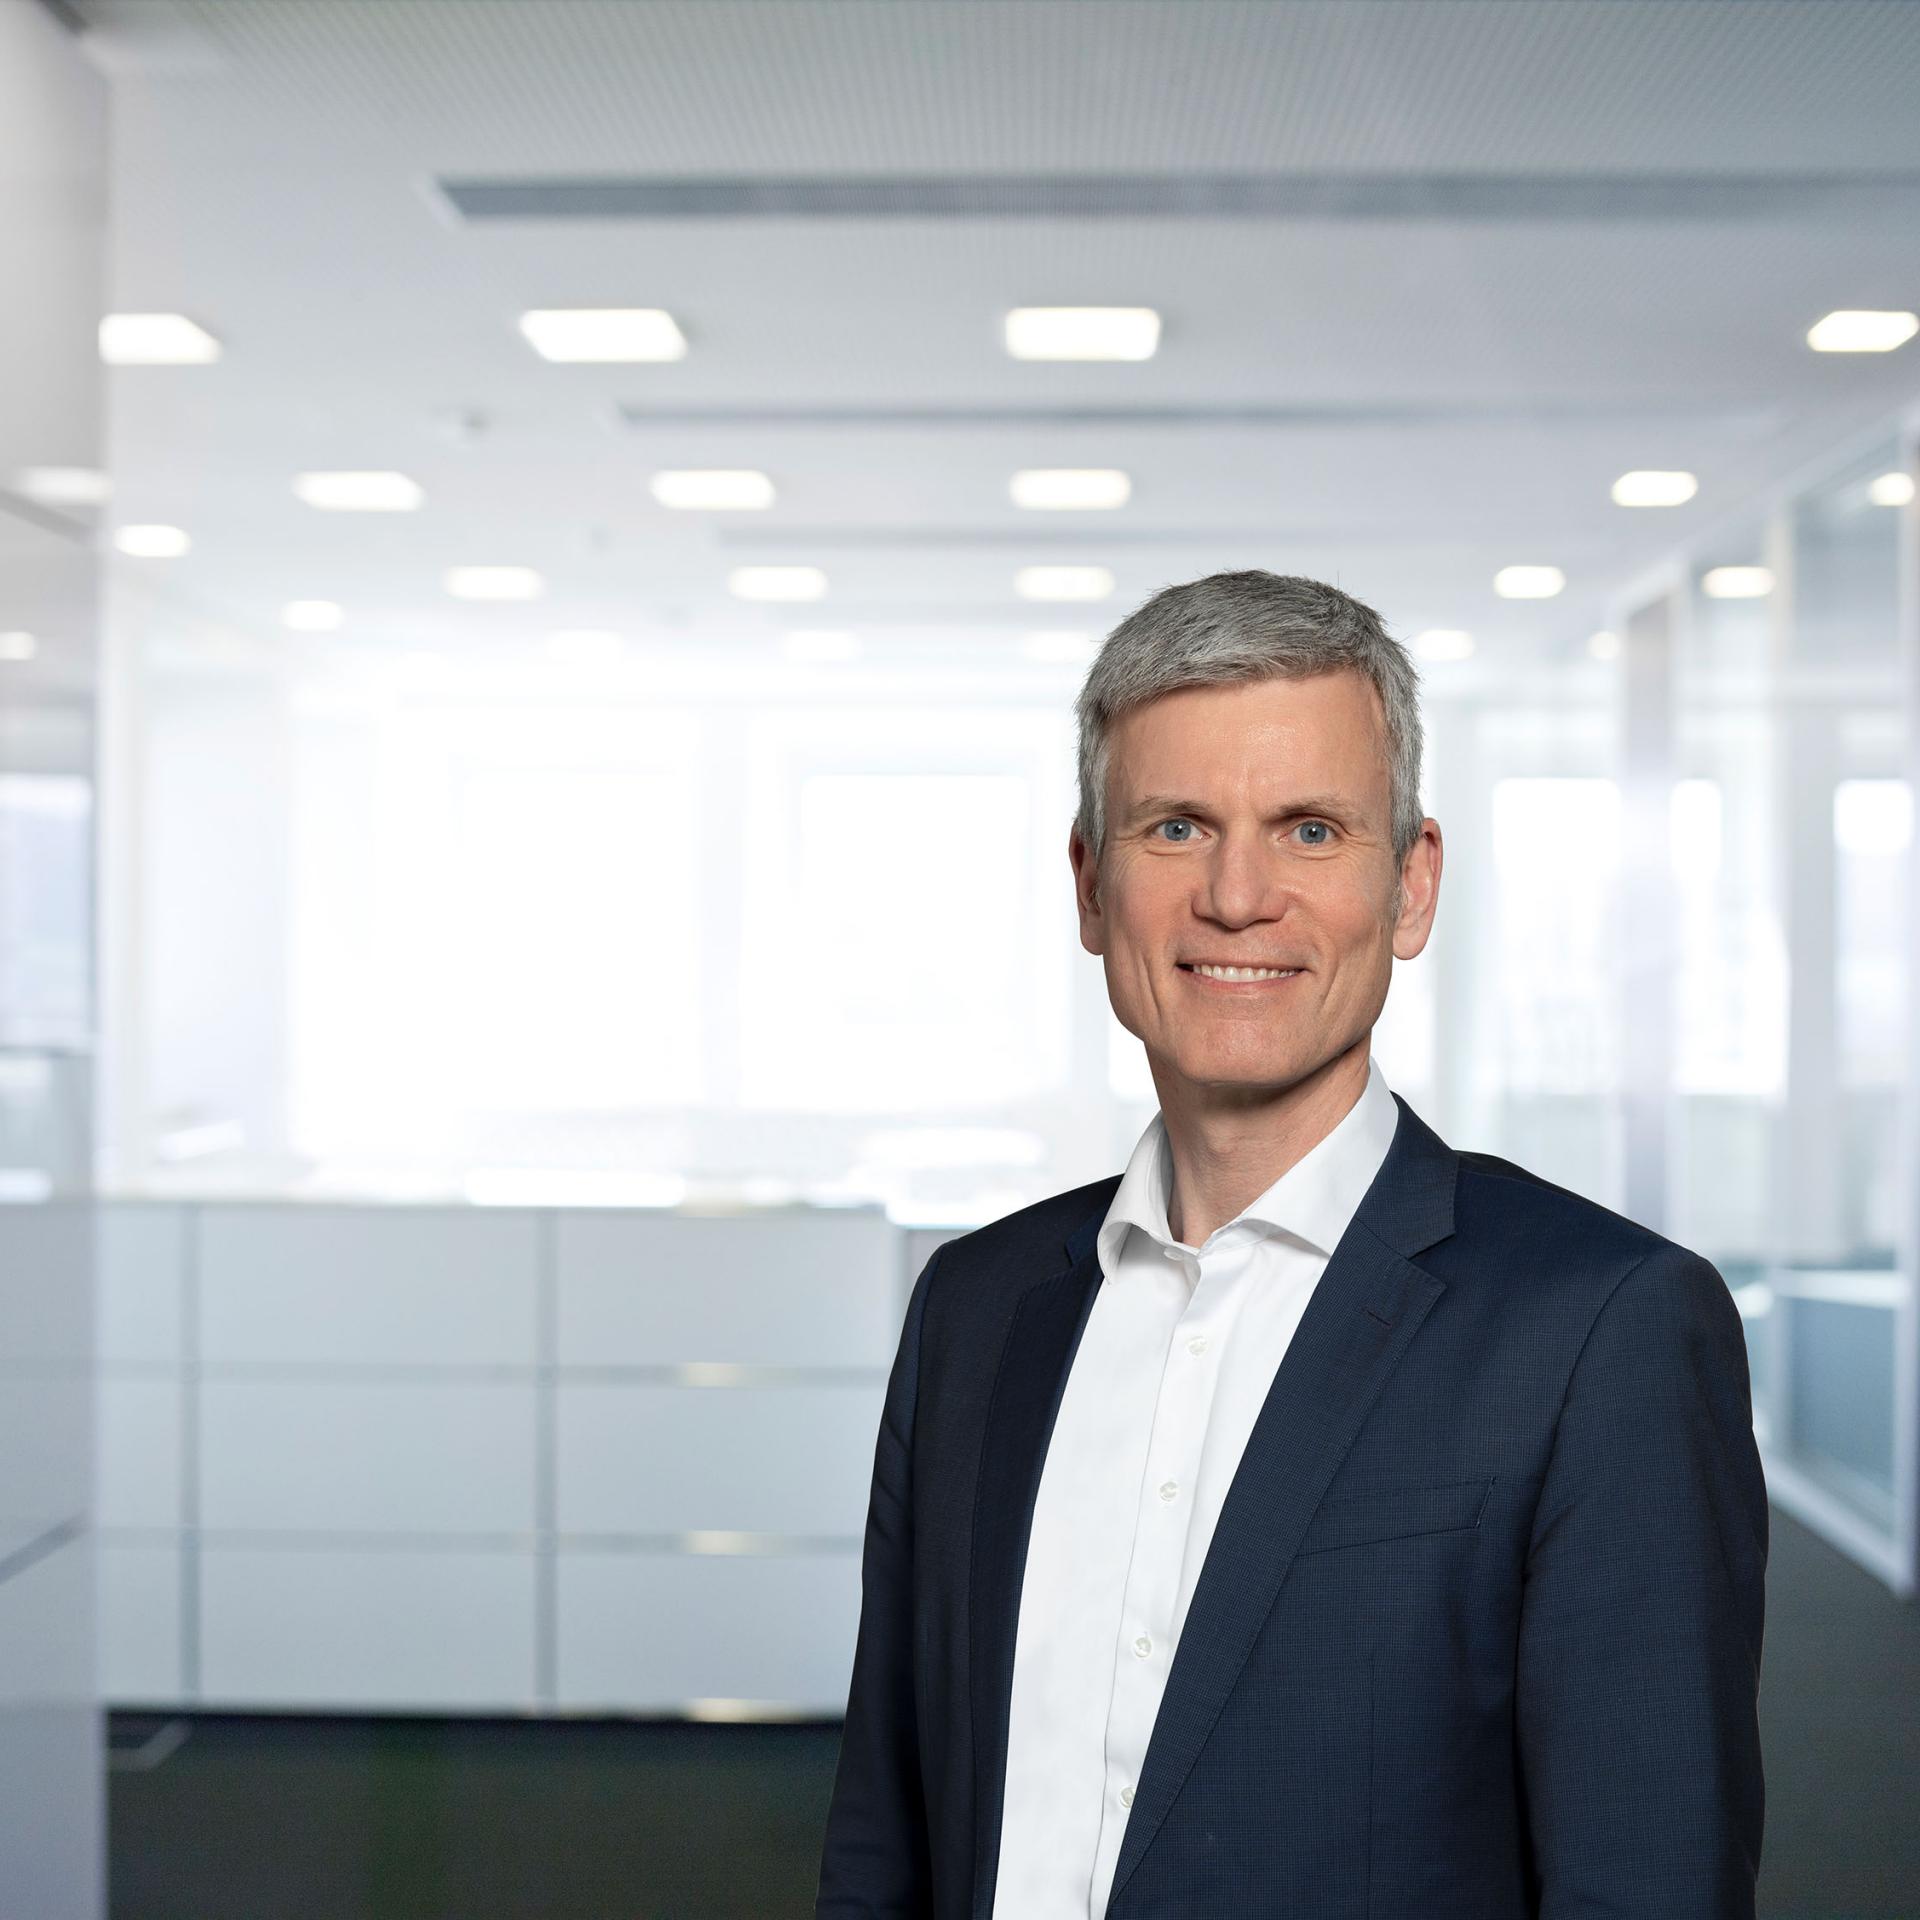 Andreas Pecher – President & Chief Executive Officer